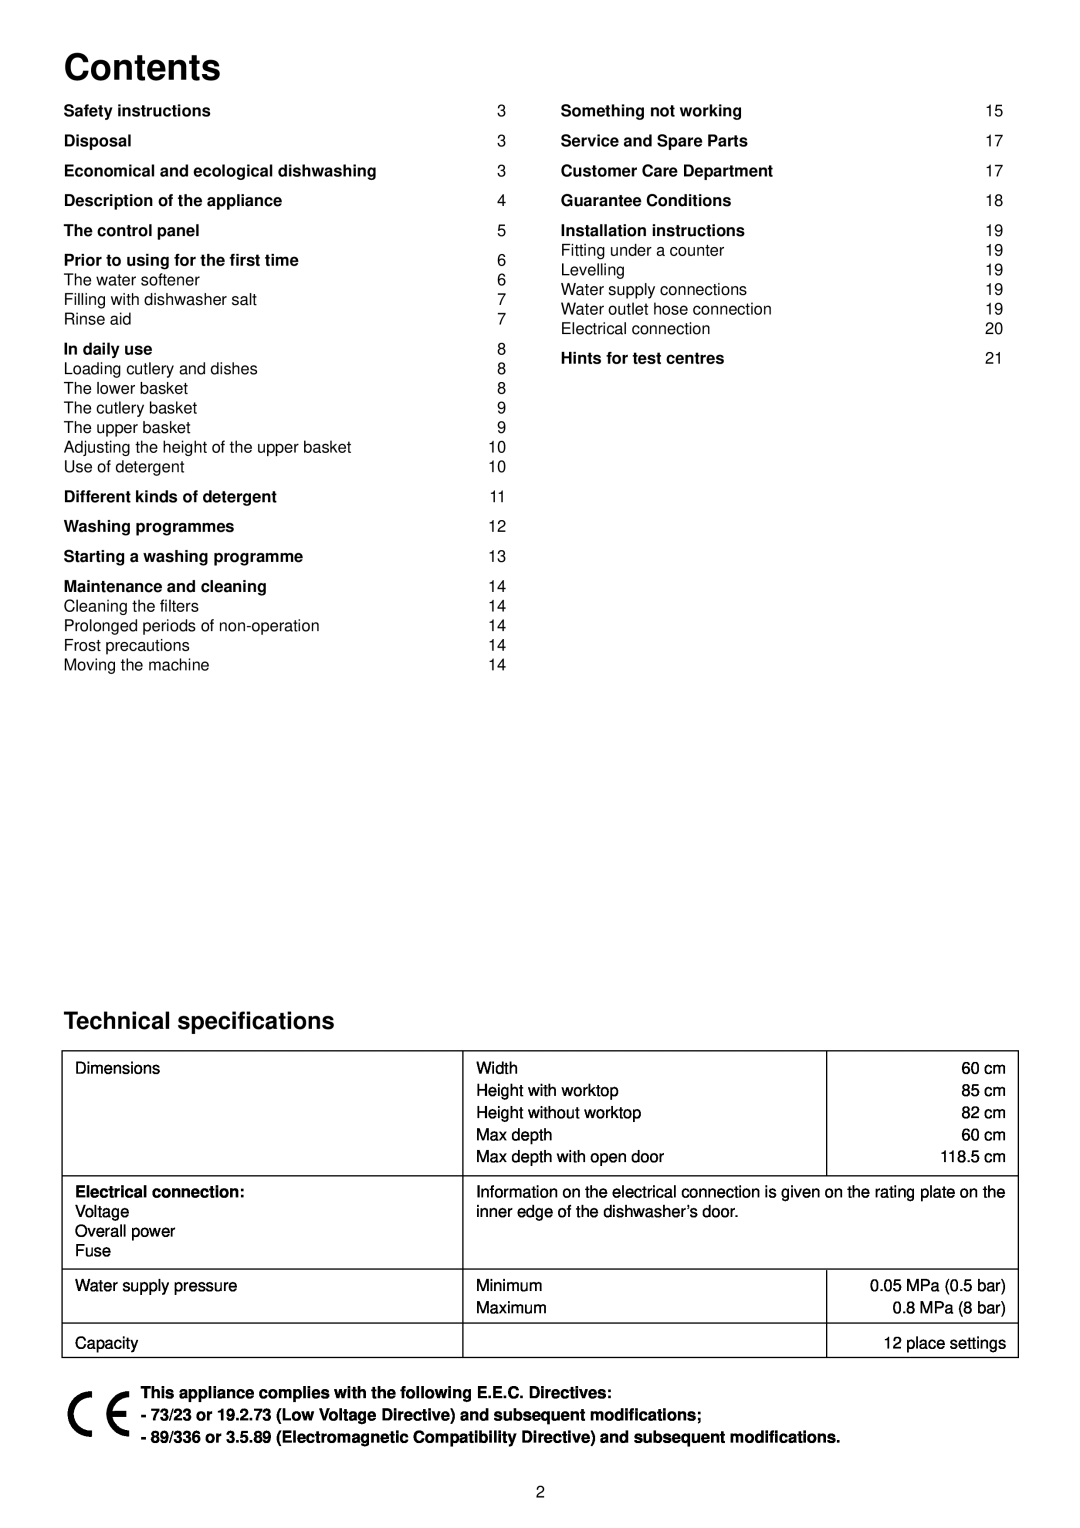 Zanussi ZDF301 manual Contents, Technical specifications 